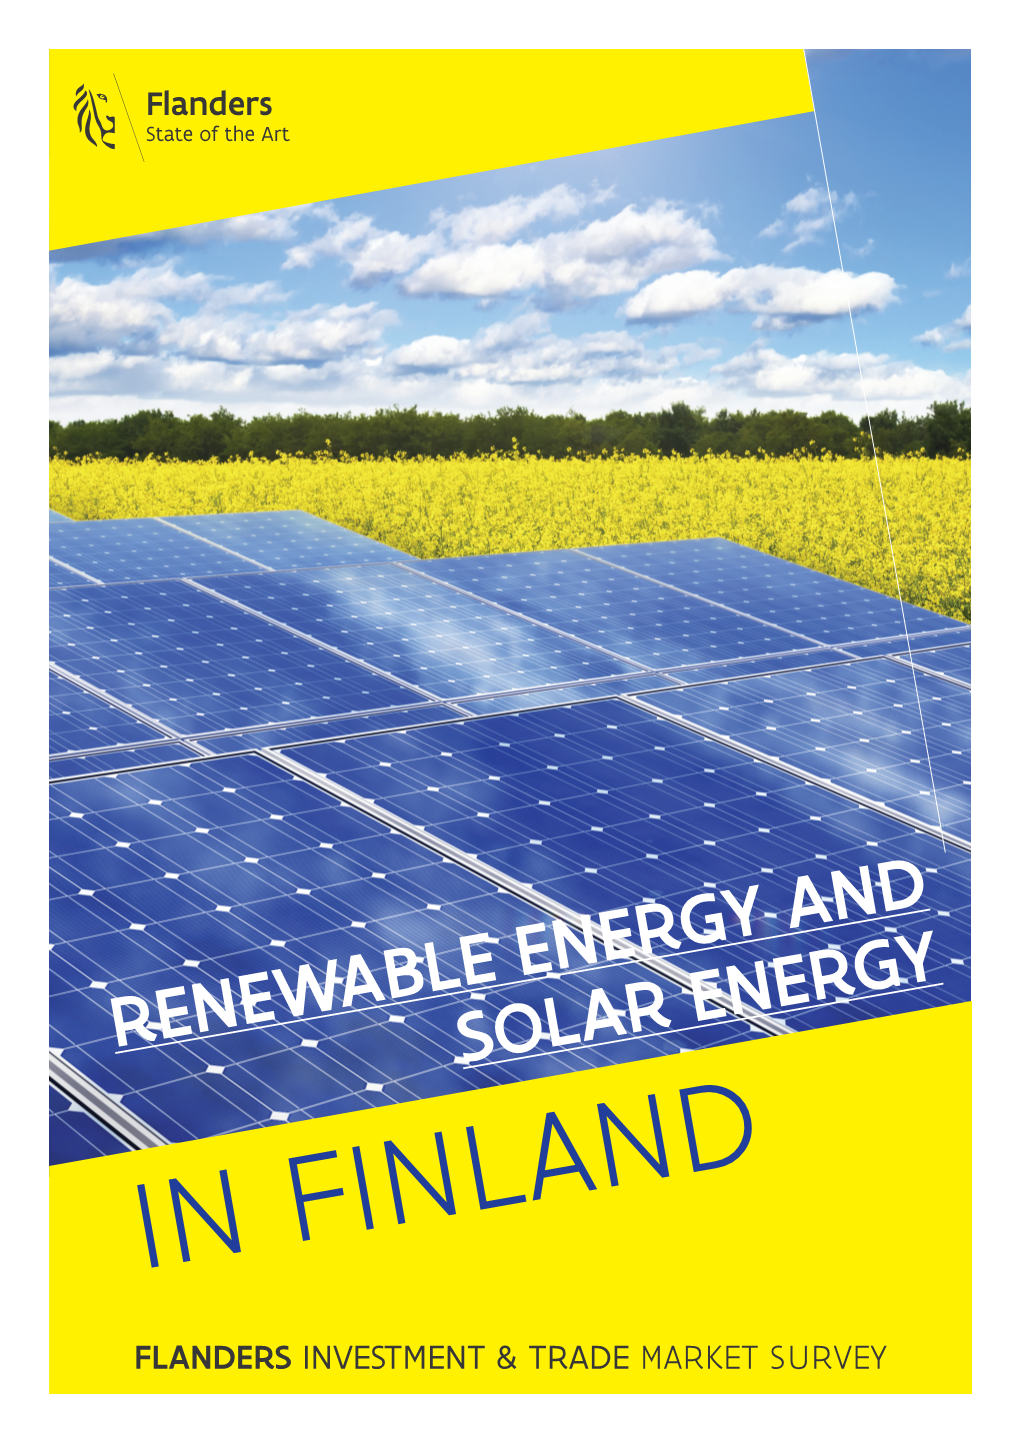 Renewable Energy and Solar Energy in Finland